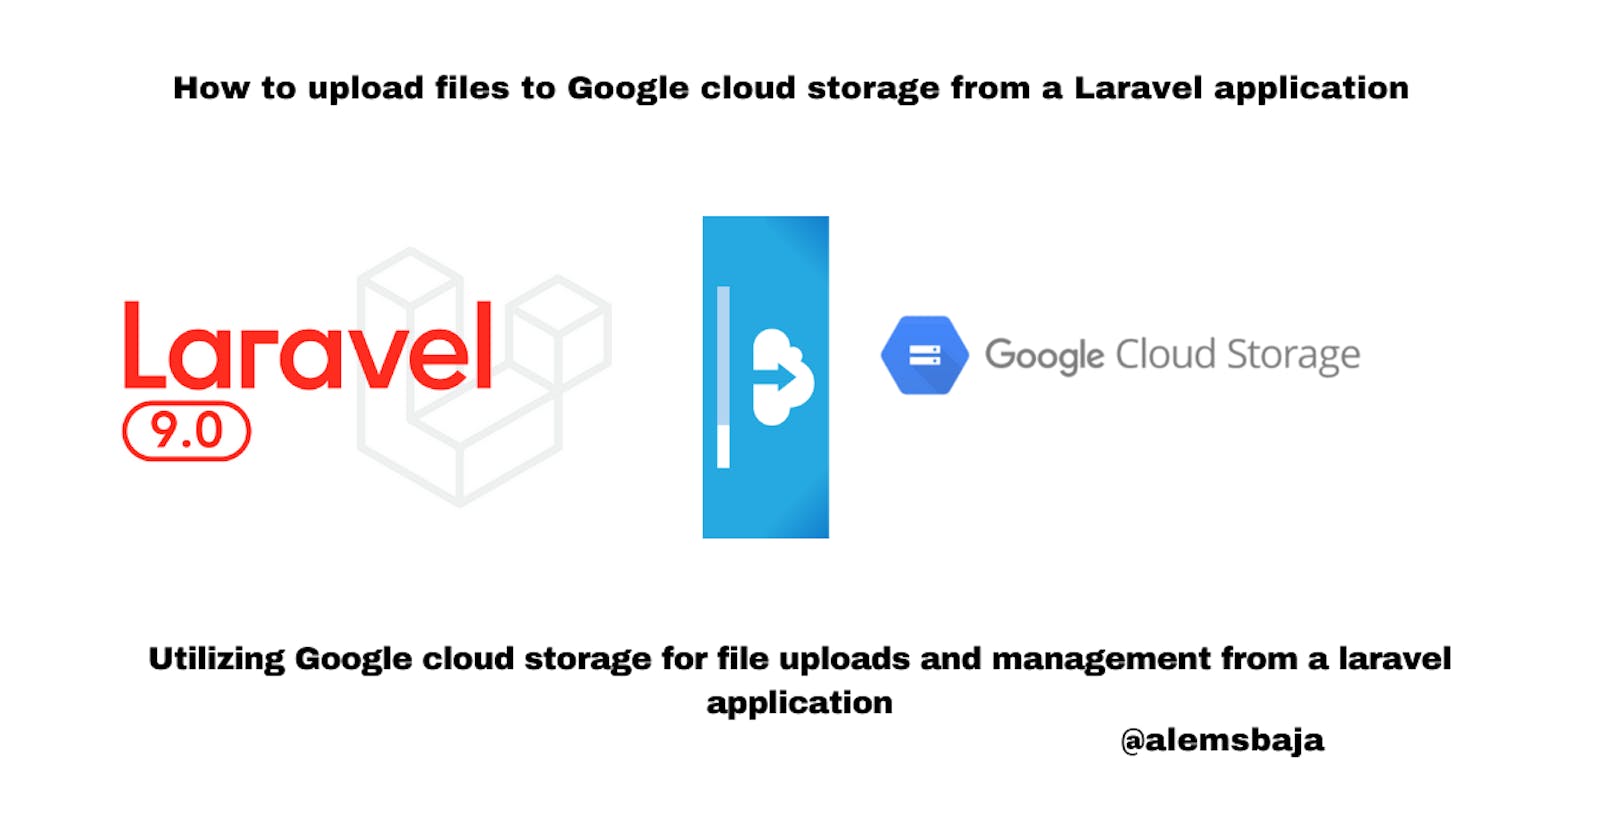 How to upload files to Google cloud storage from a Laravel application